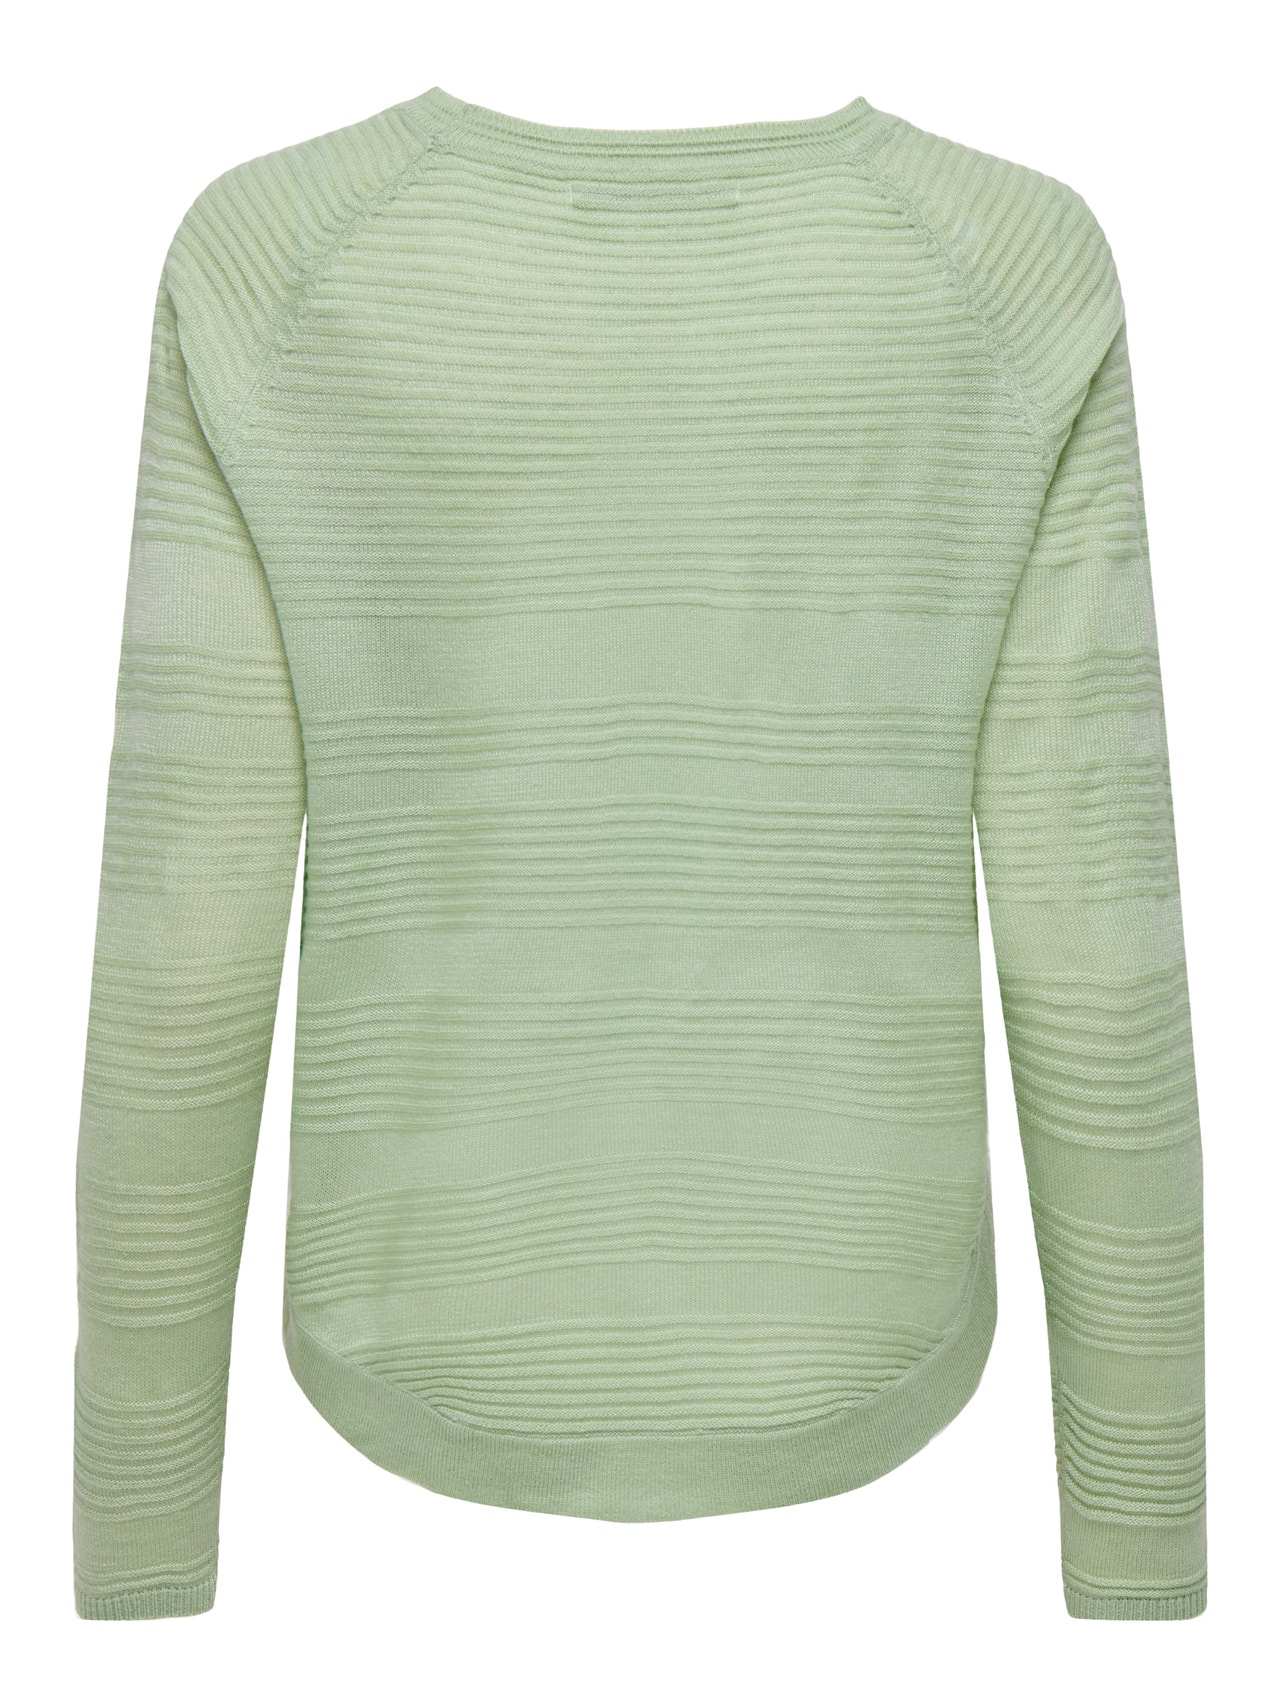 ONLY Couleur unie Pull en maille -Smoke Green - 15141866